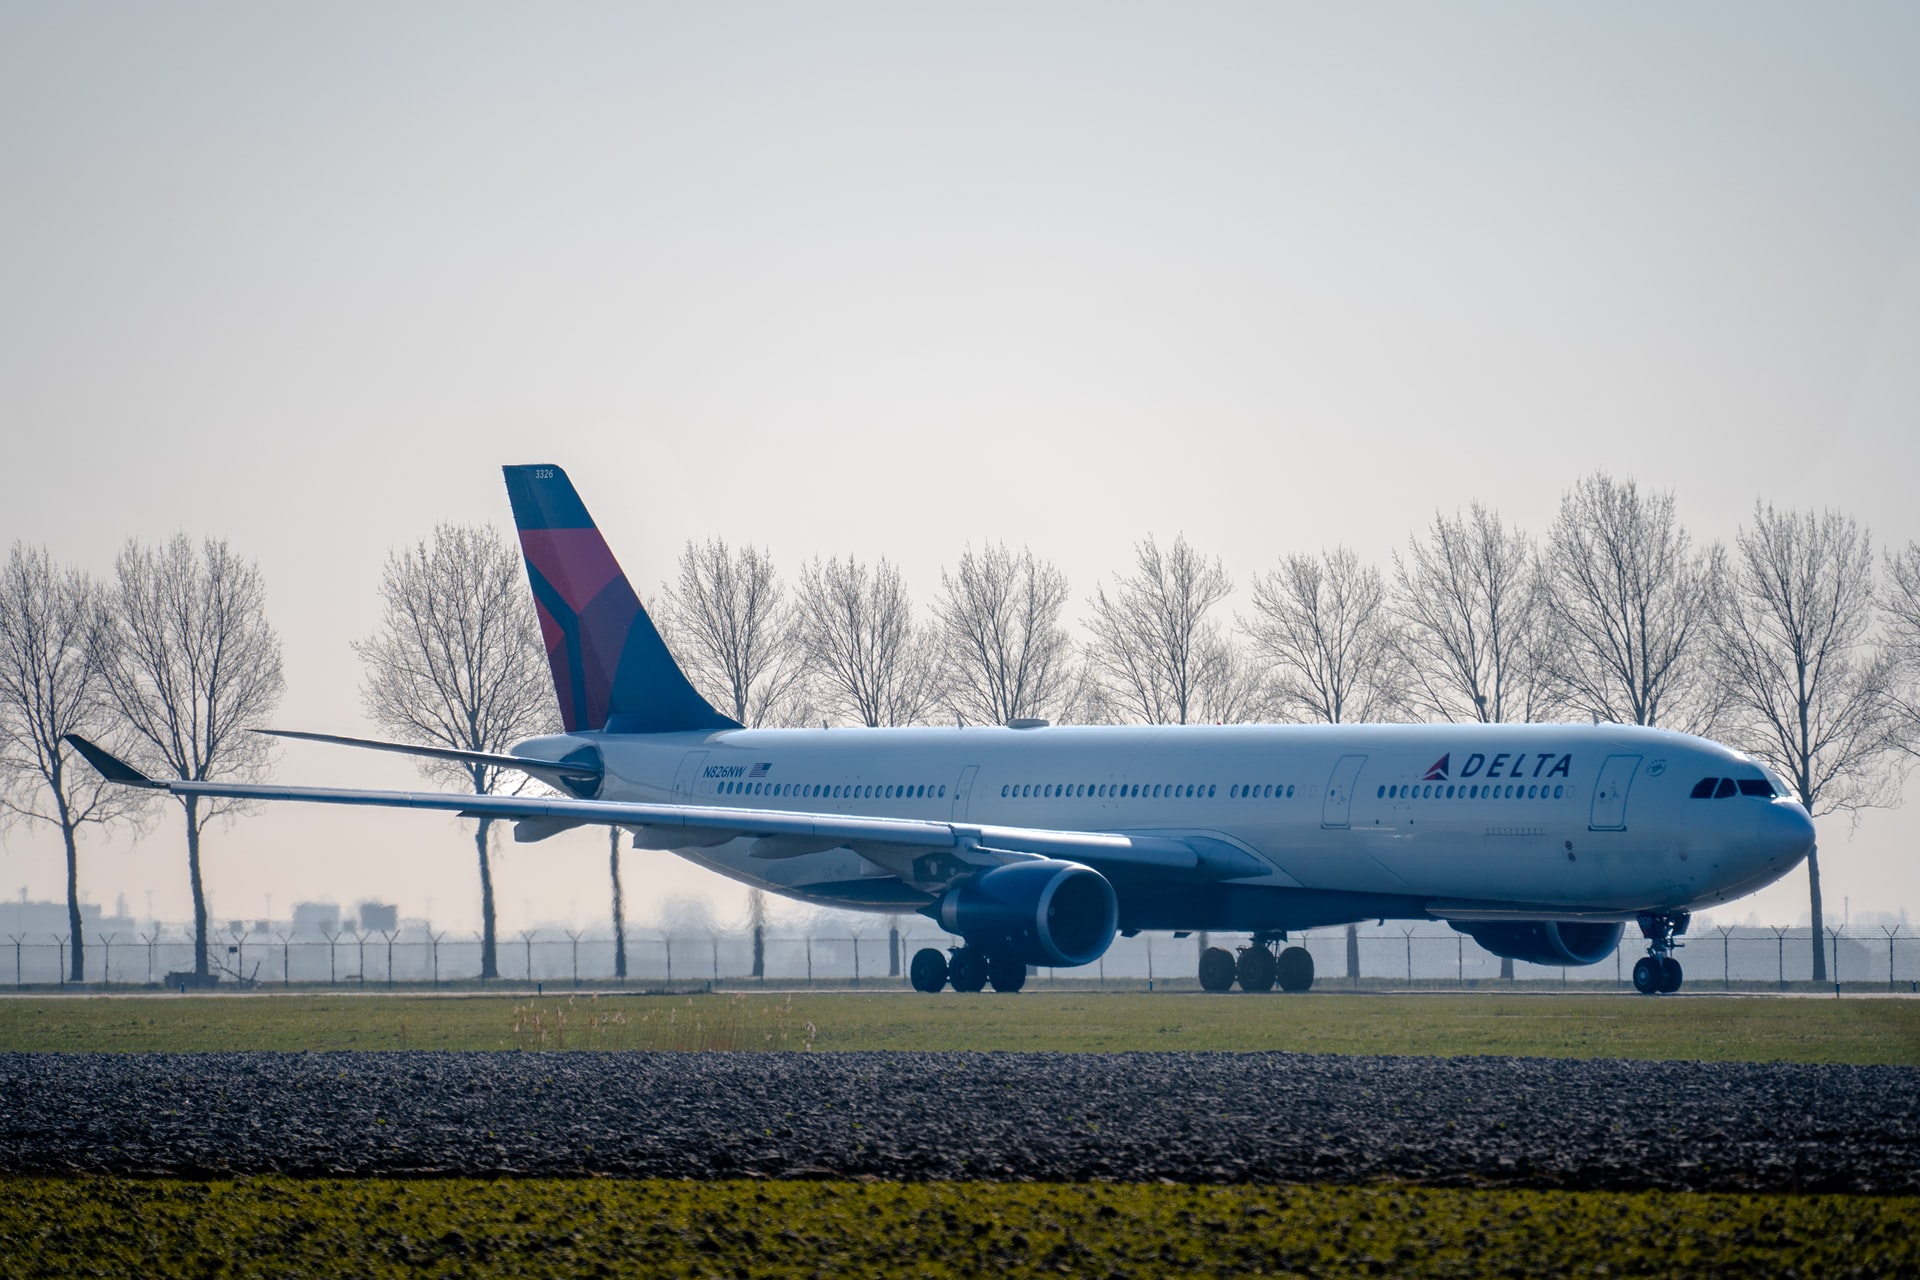 A Delta Airlines taxiing on a runway next to trees and grass.